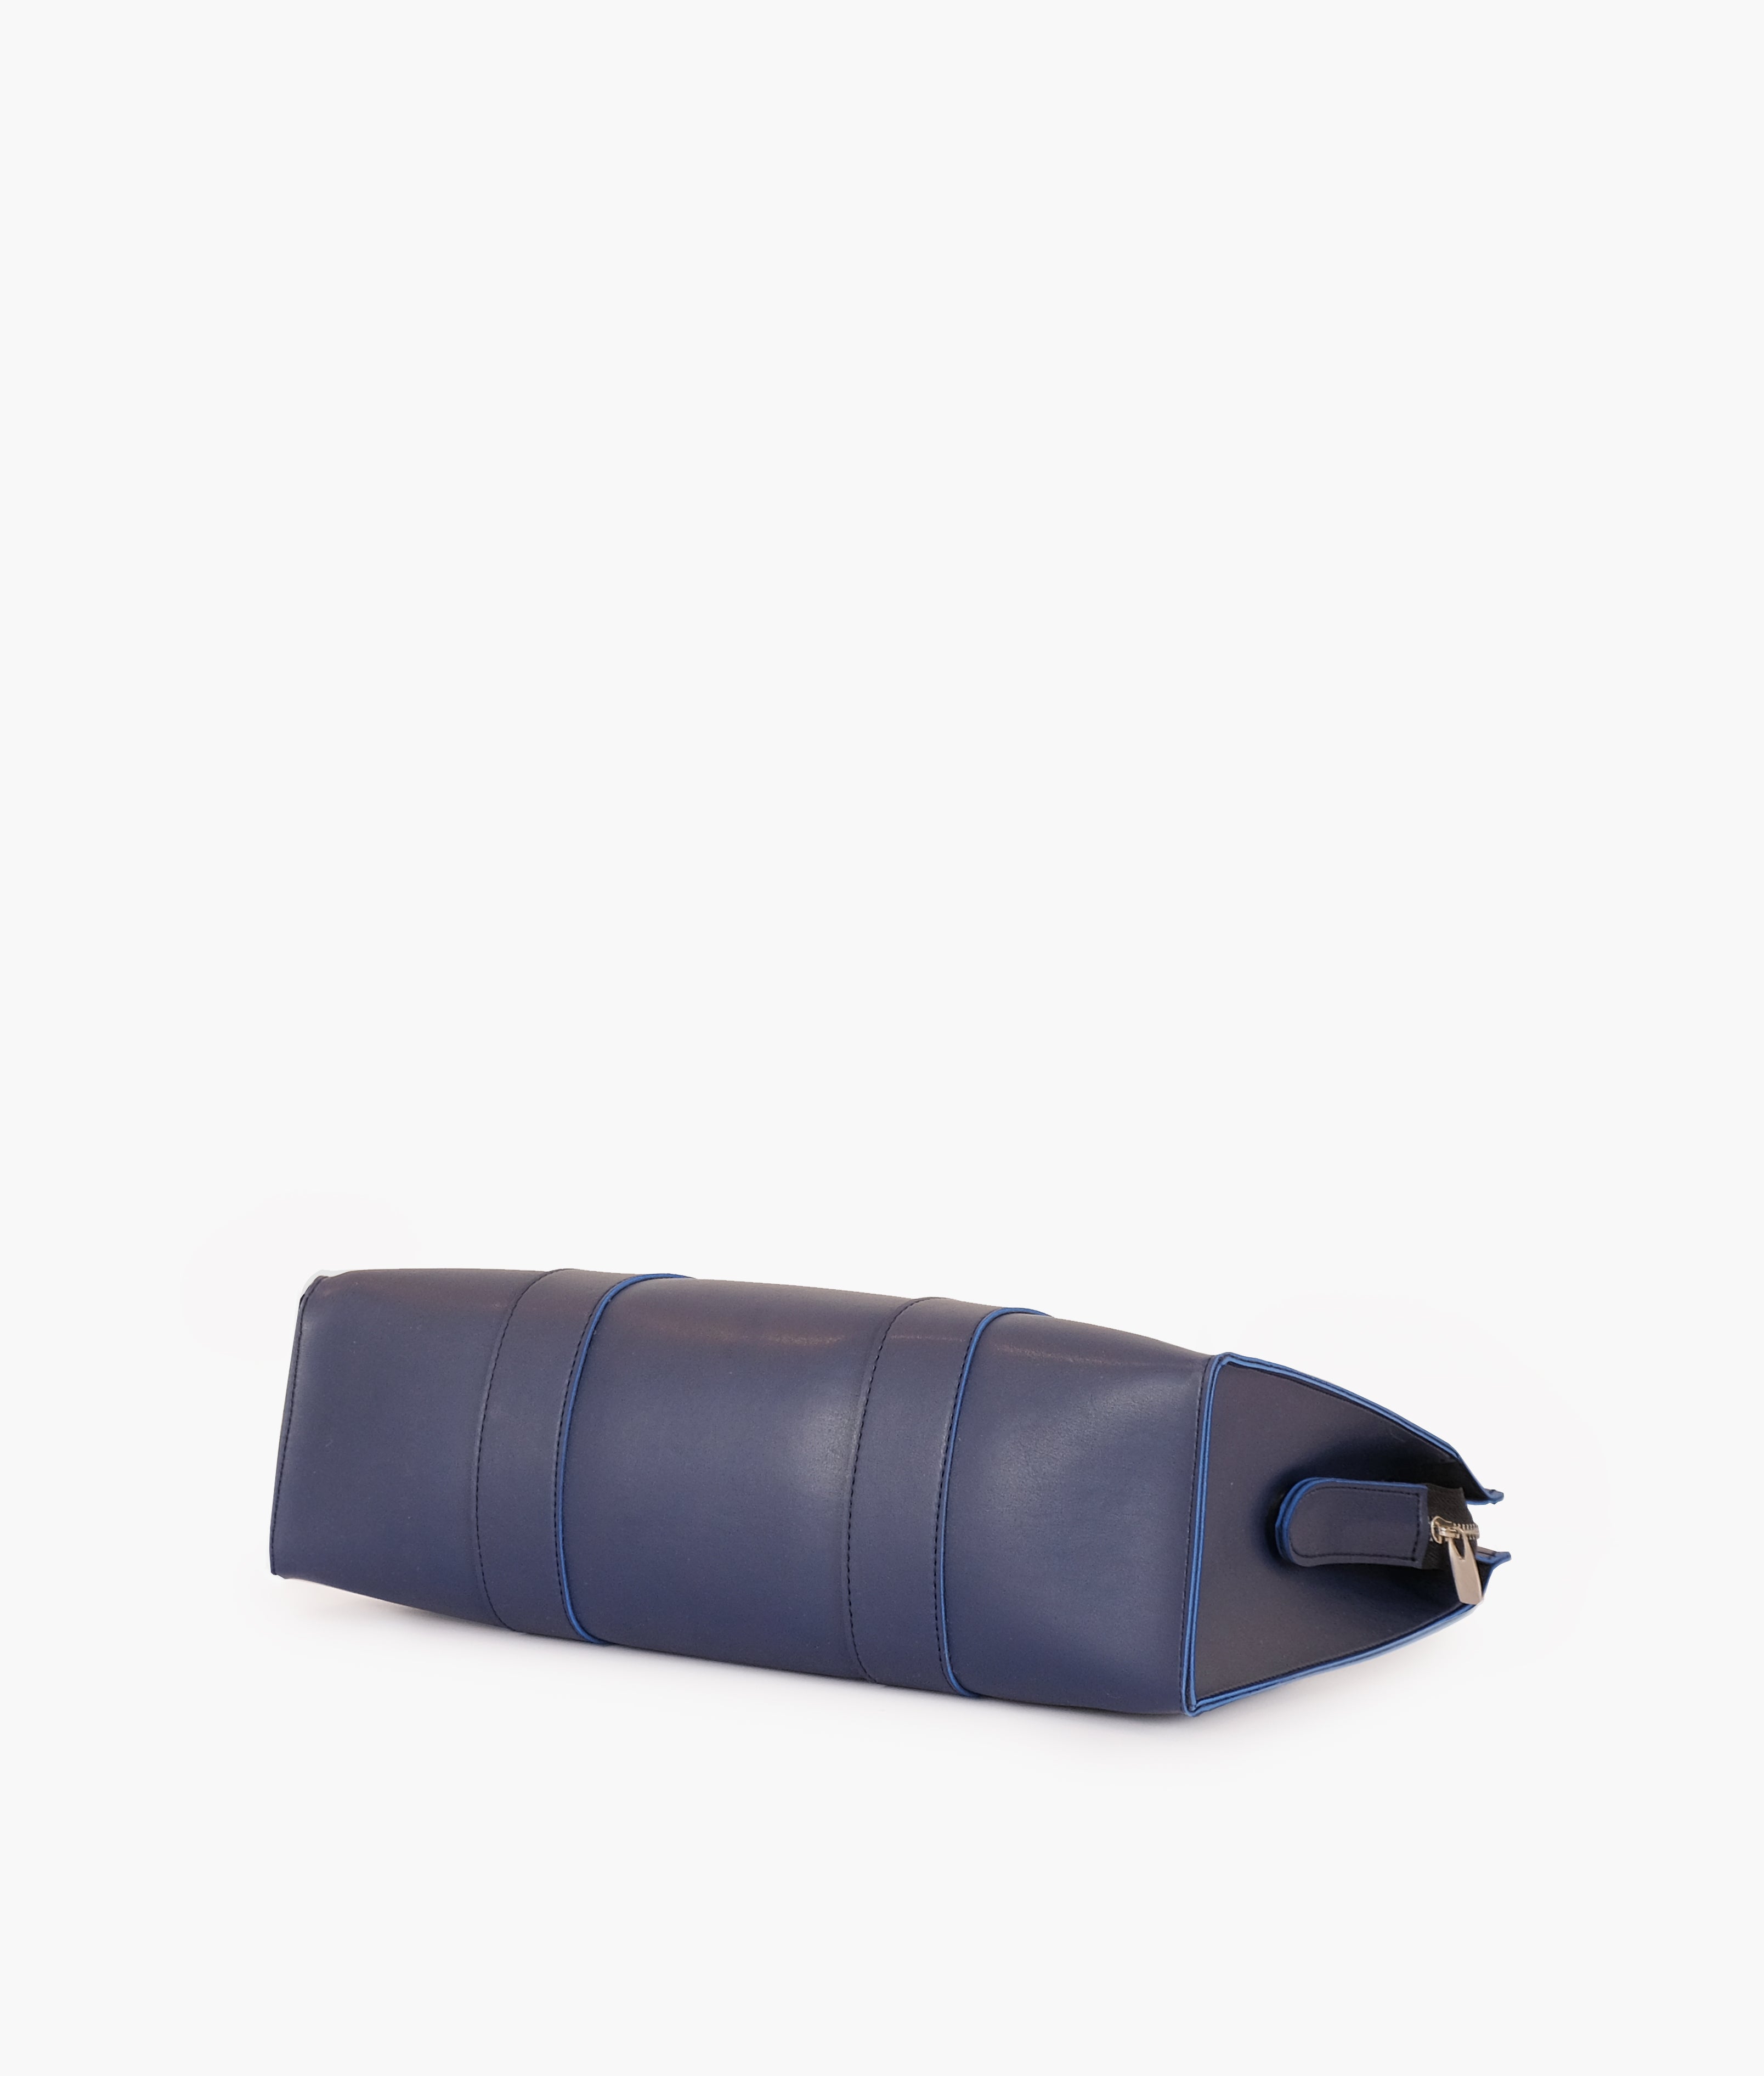 Blue laptop bag with sleeve